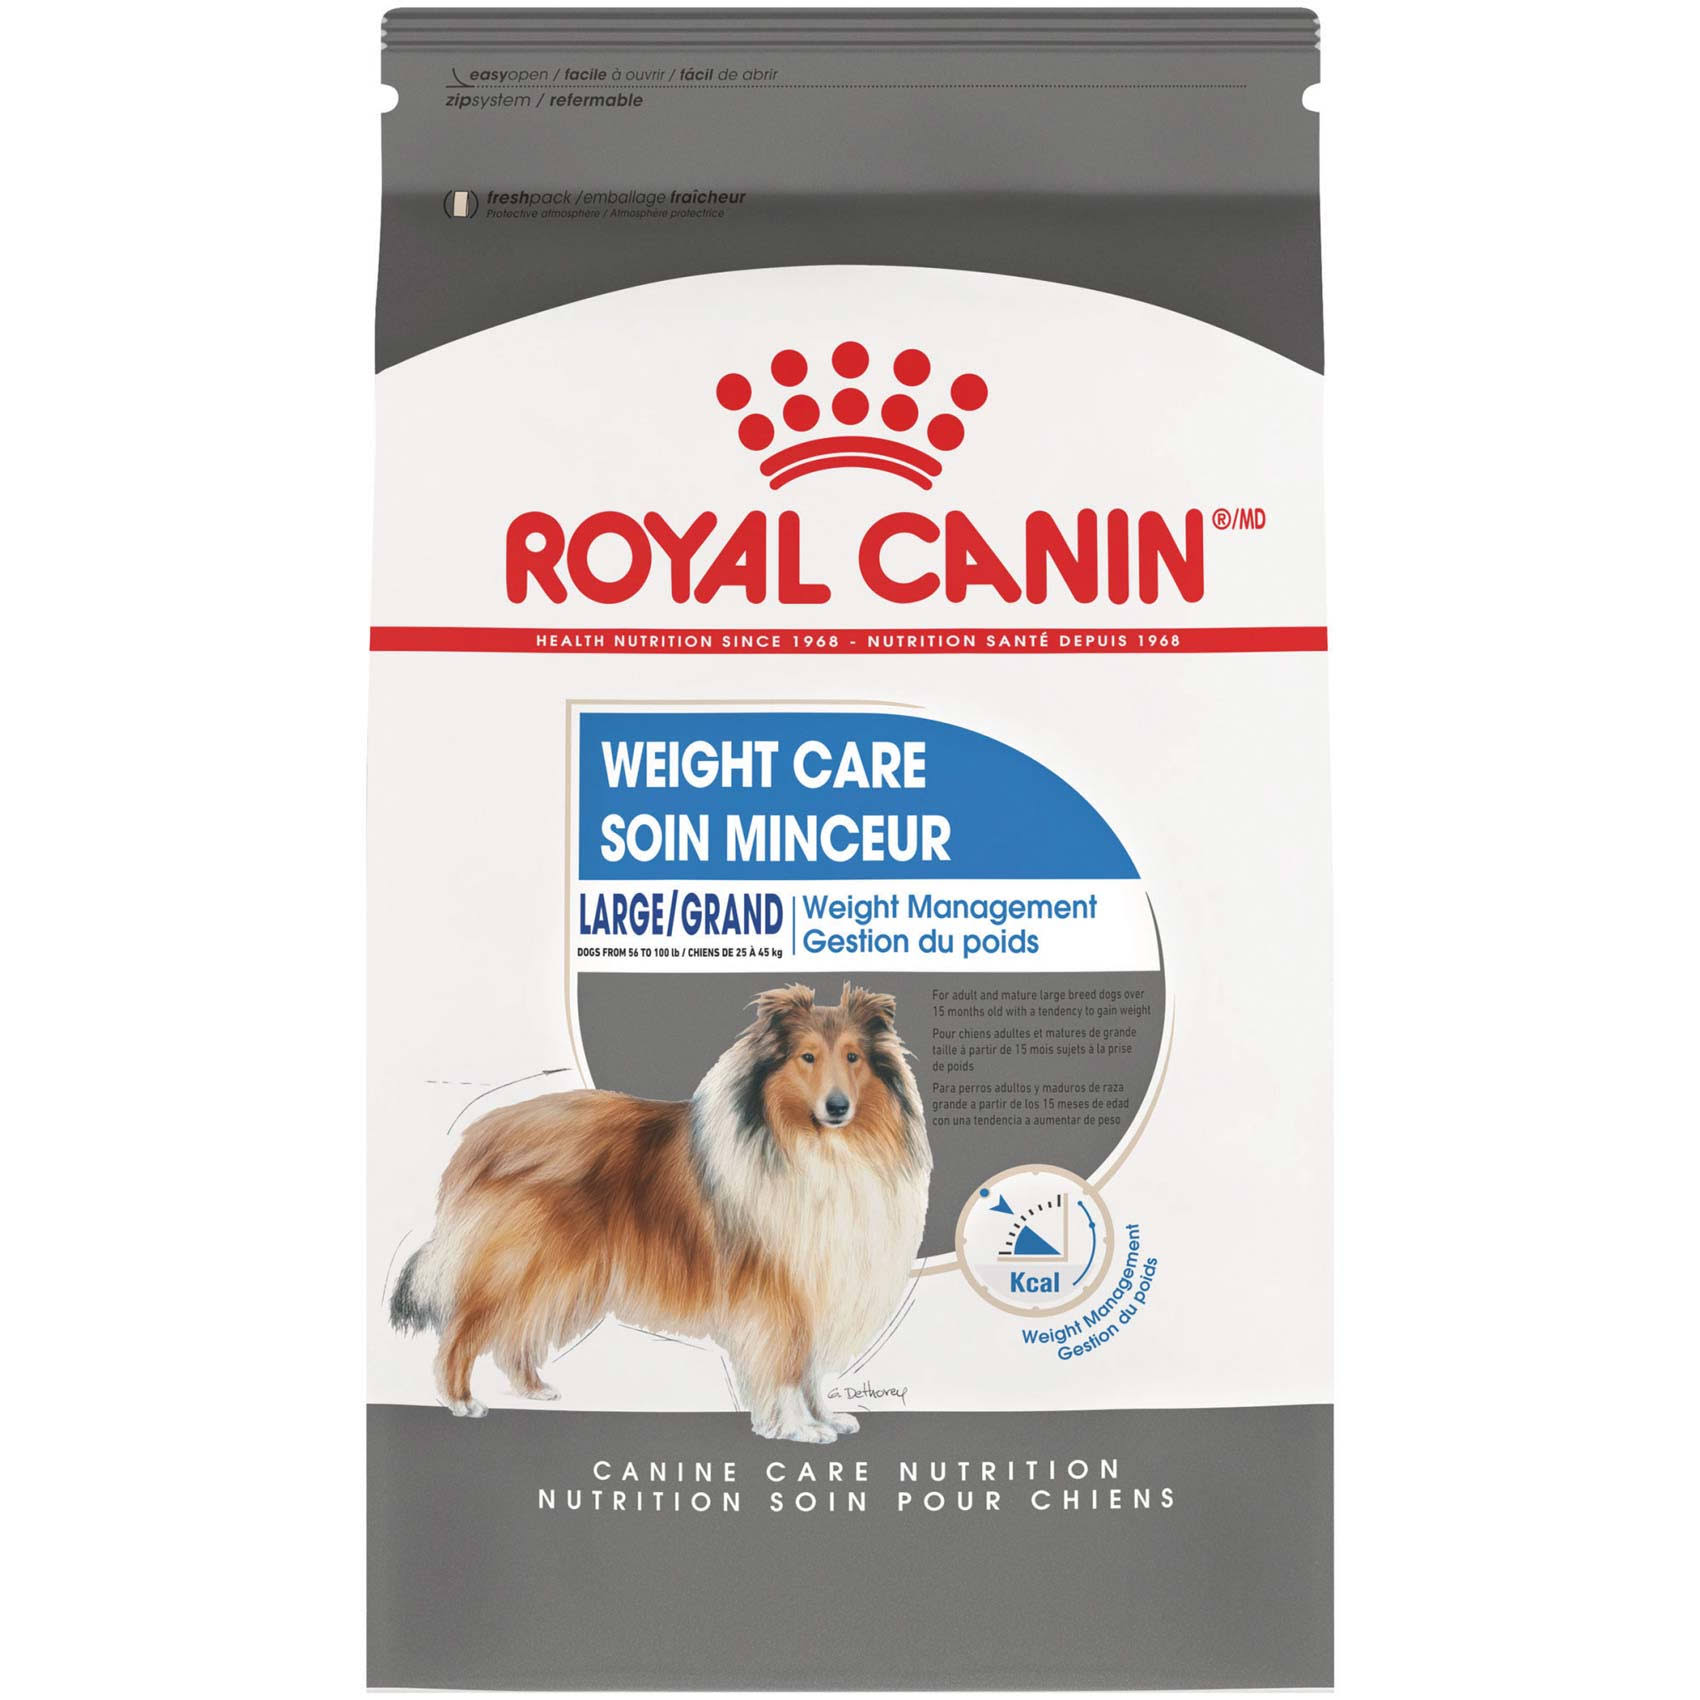 Royal Canin Maxi Weight Care Dog Dry Food - 30lb